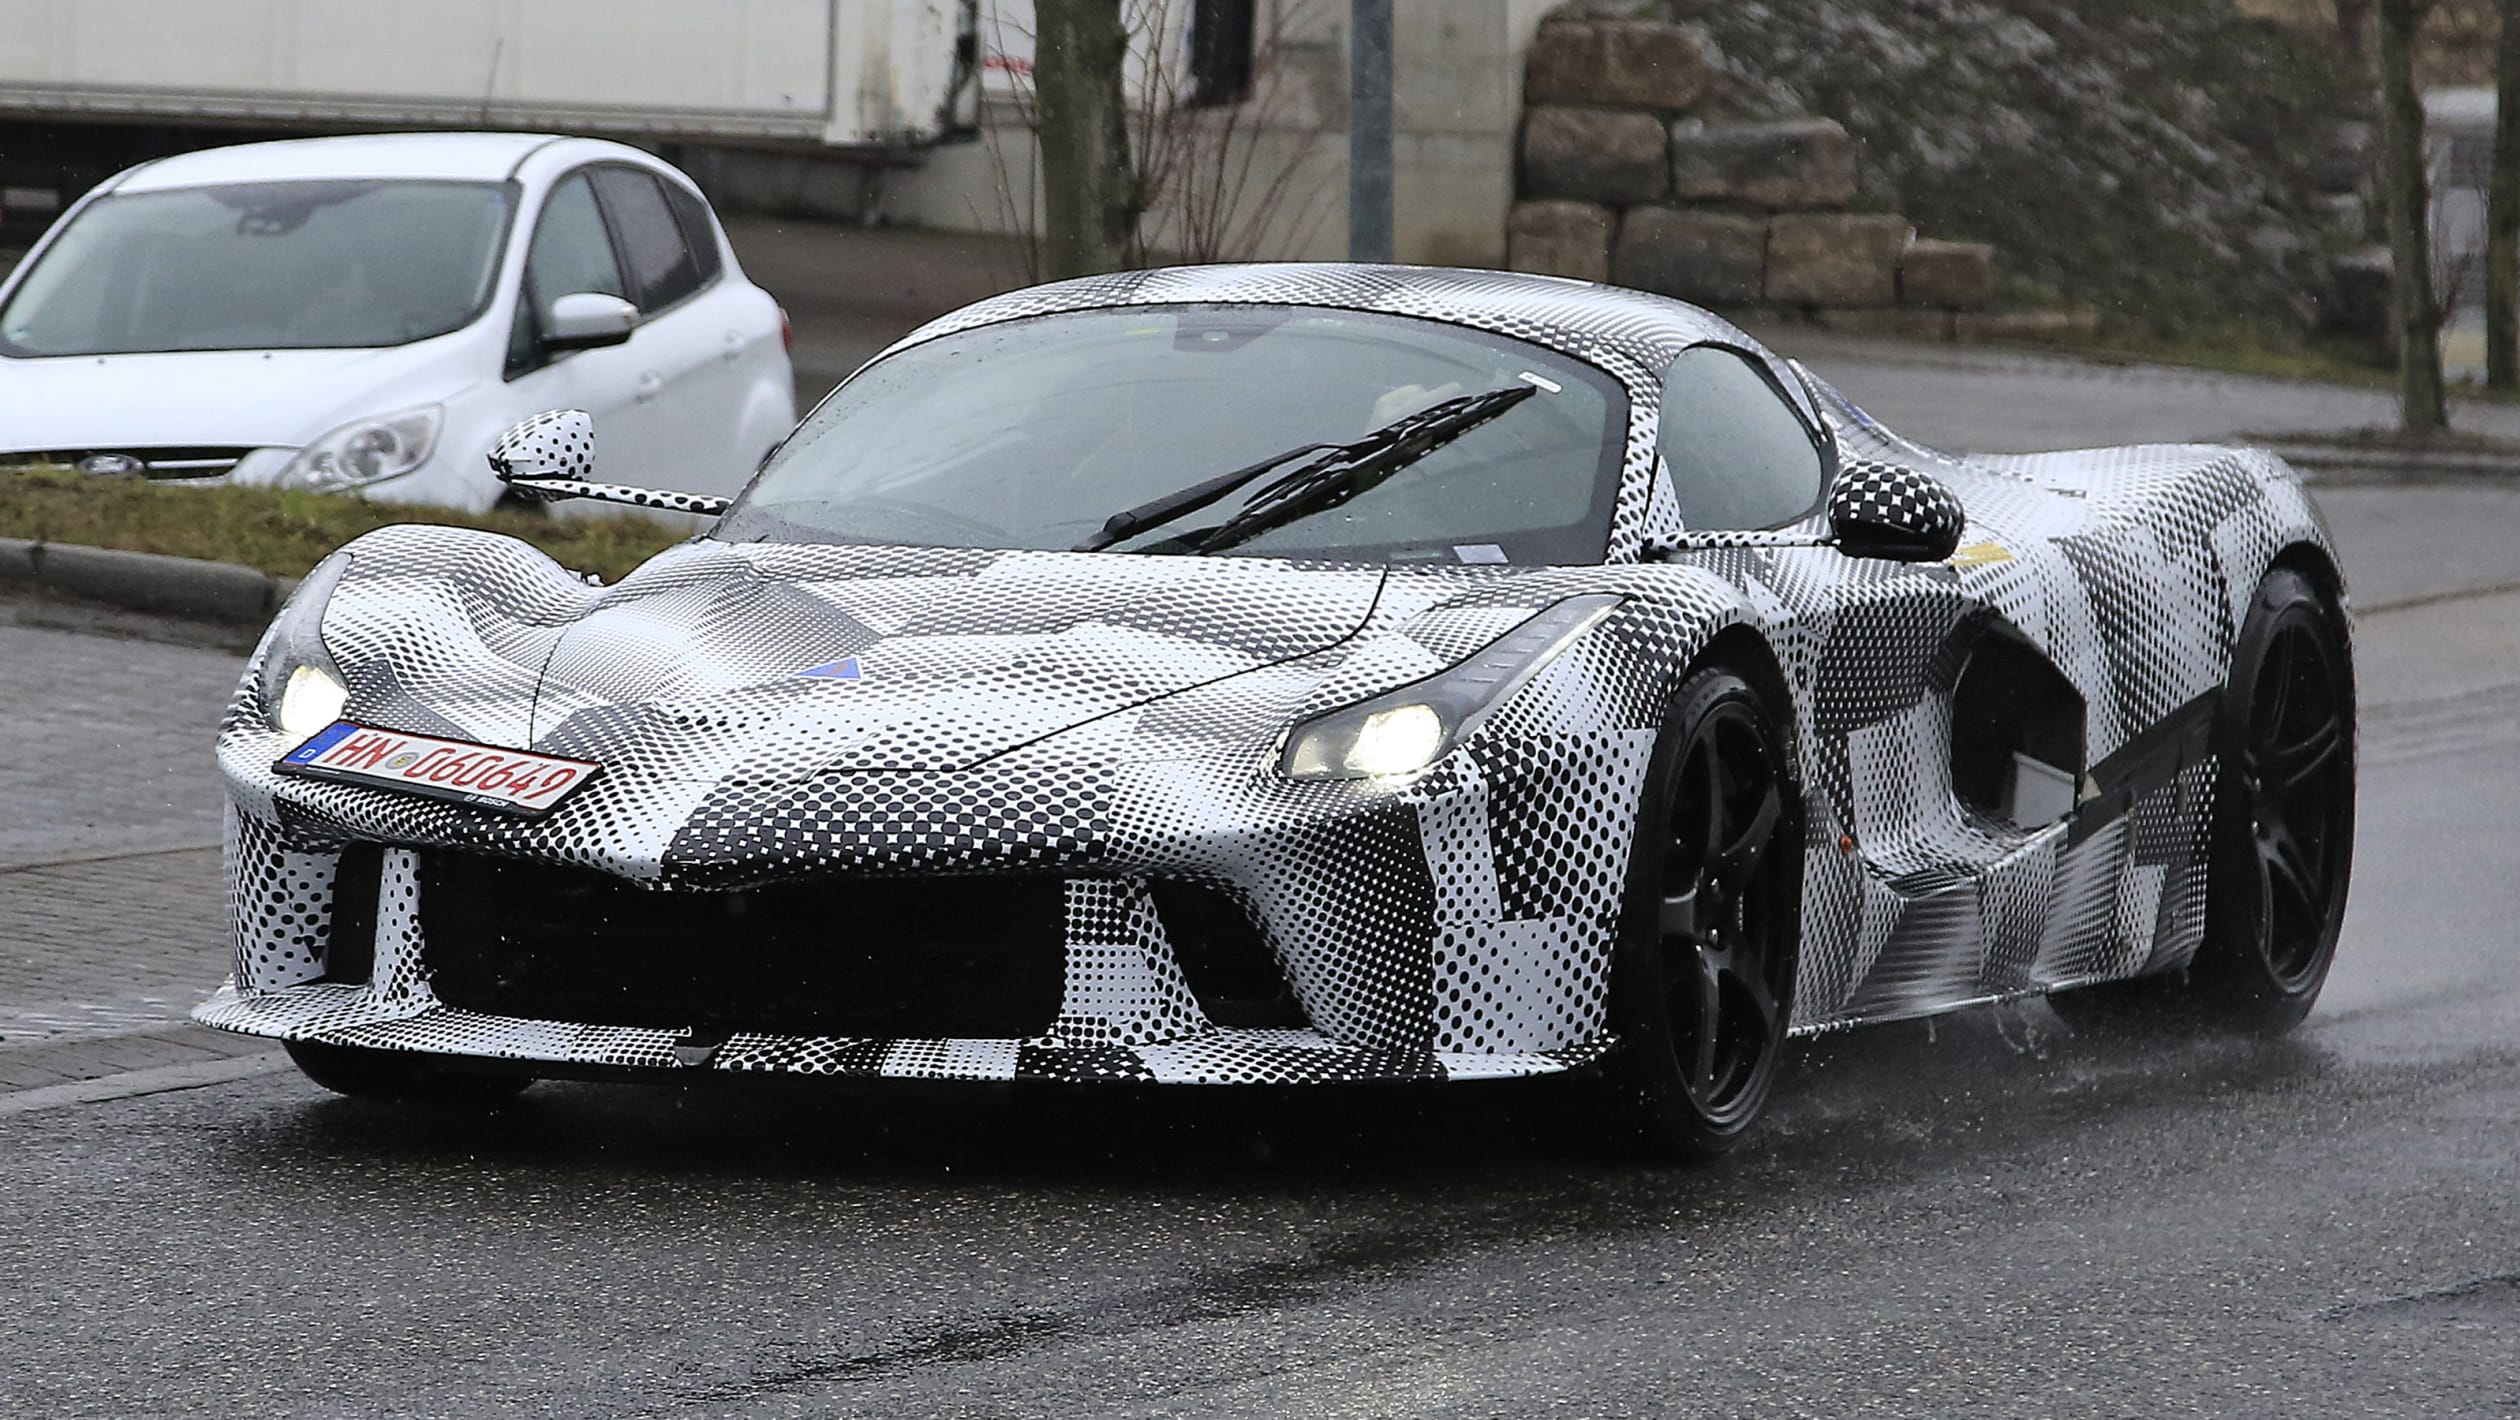 New 2023 Ferrari Hypercar spied for the first time Automotive Daily